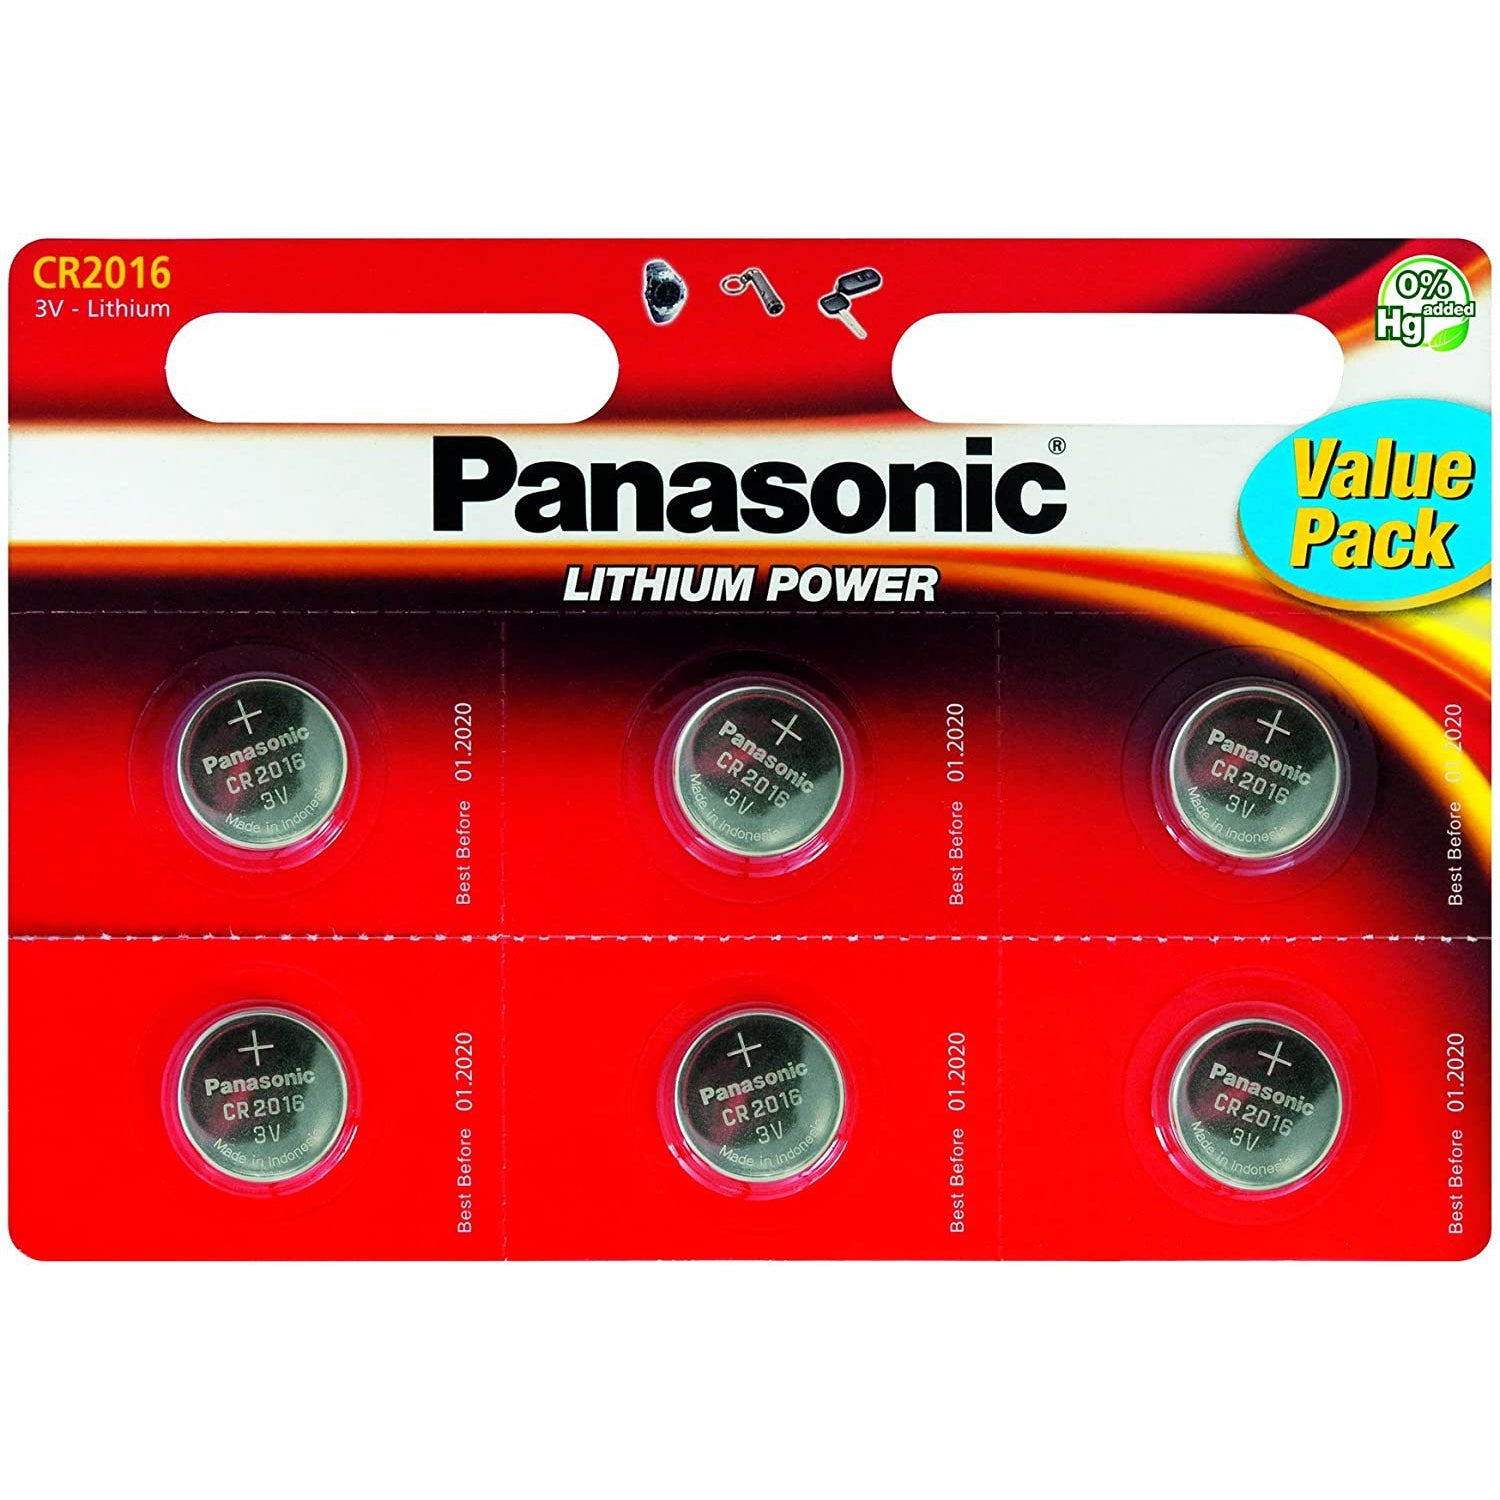 Panasonic 2583 CR 2016 Lithium Button Cell Battery - Pack of 6